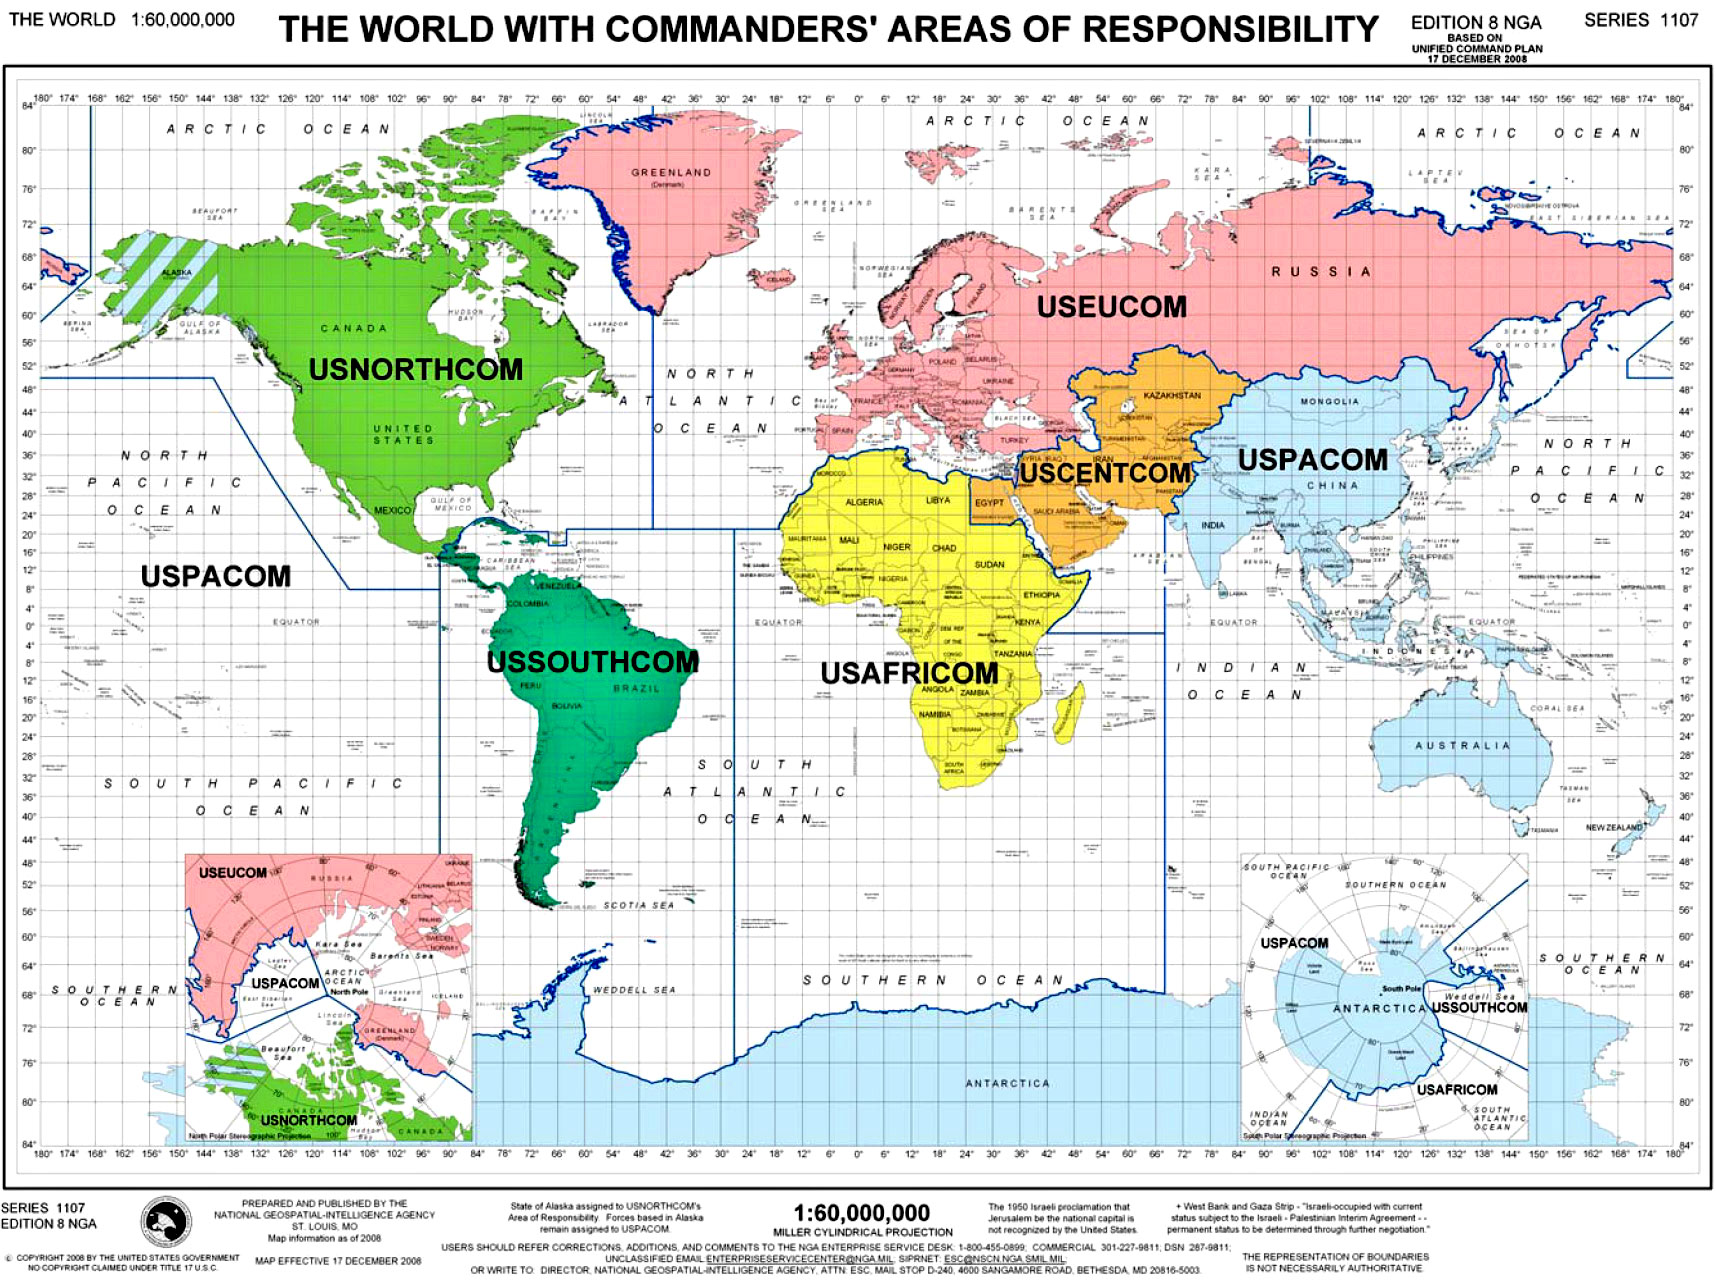 he World and Territories Under the Responsibility of a Combatant Command or Under a Command Structure Map-the World With Commander' Area of Responsibility